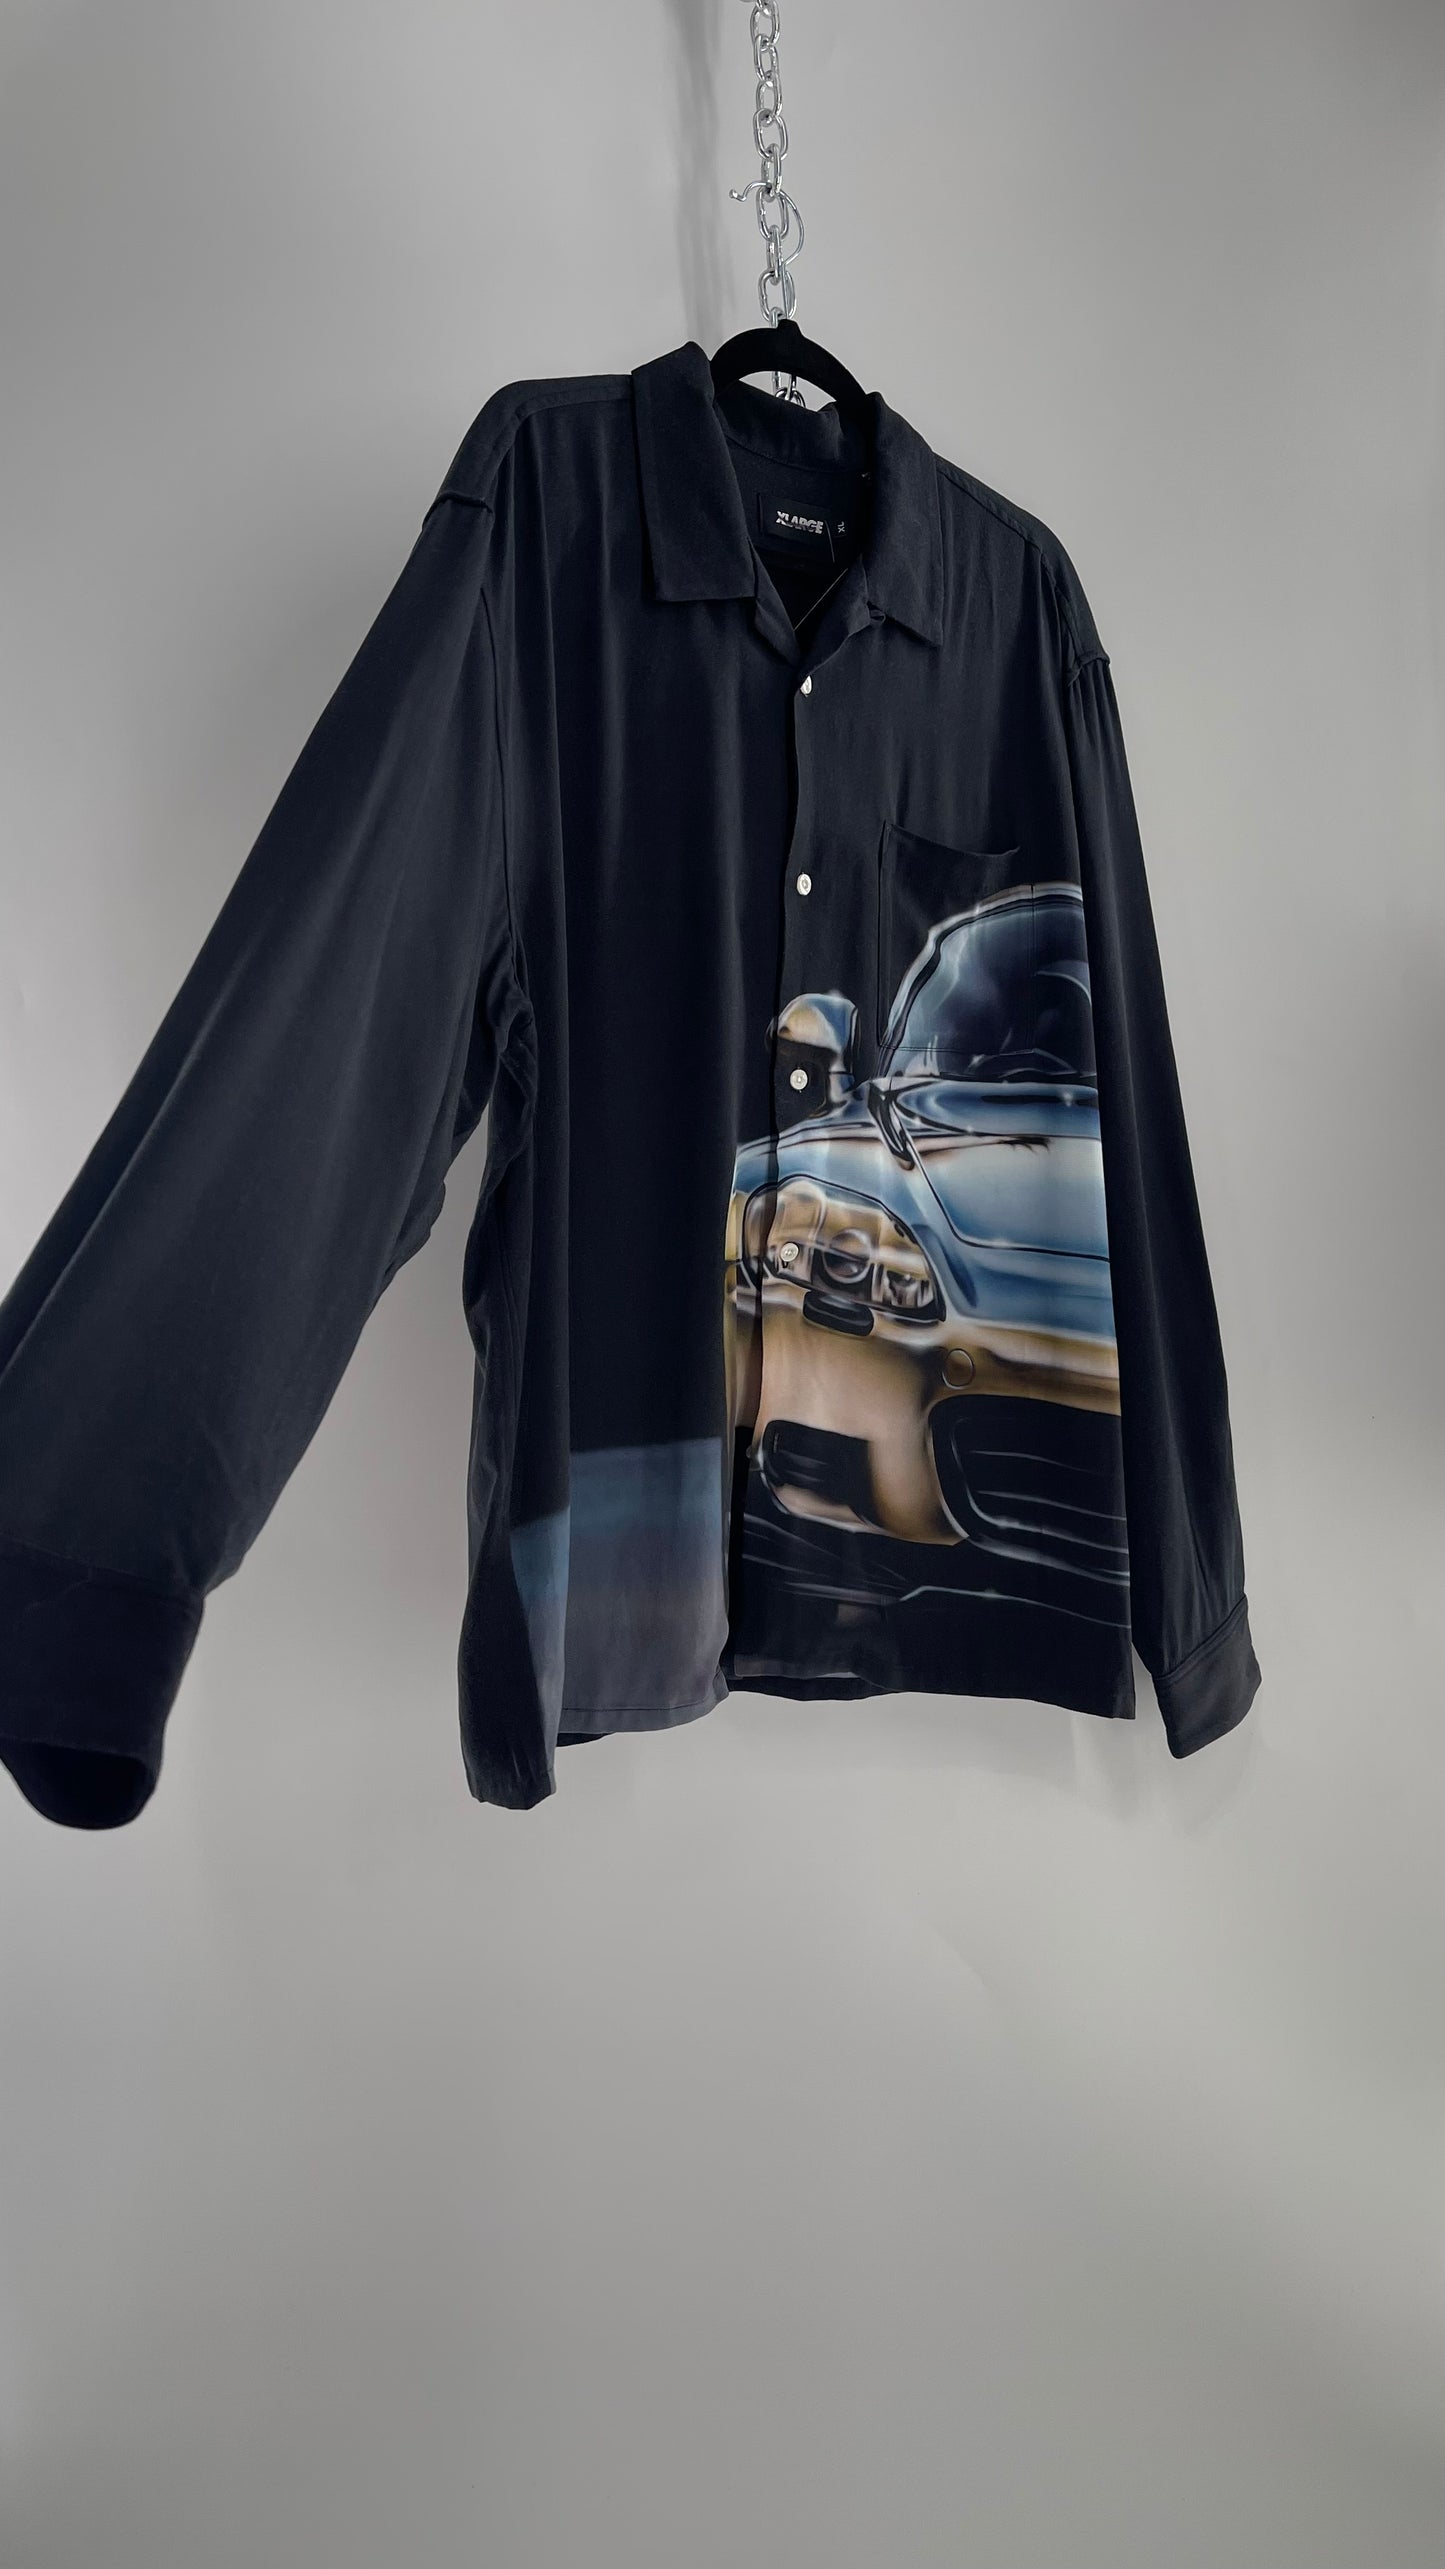 XLARGE Black 100% Rayon Men’s Button Up with HD Futuristic Car Graphic  (XL)